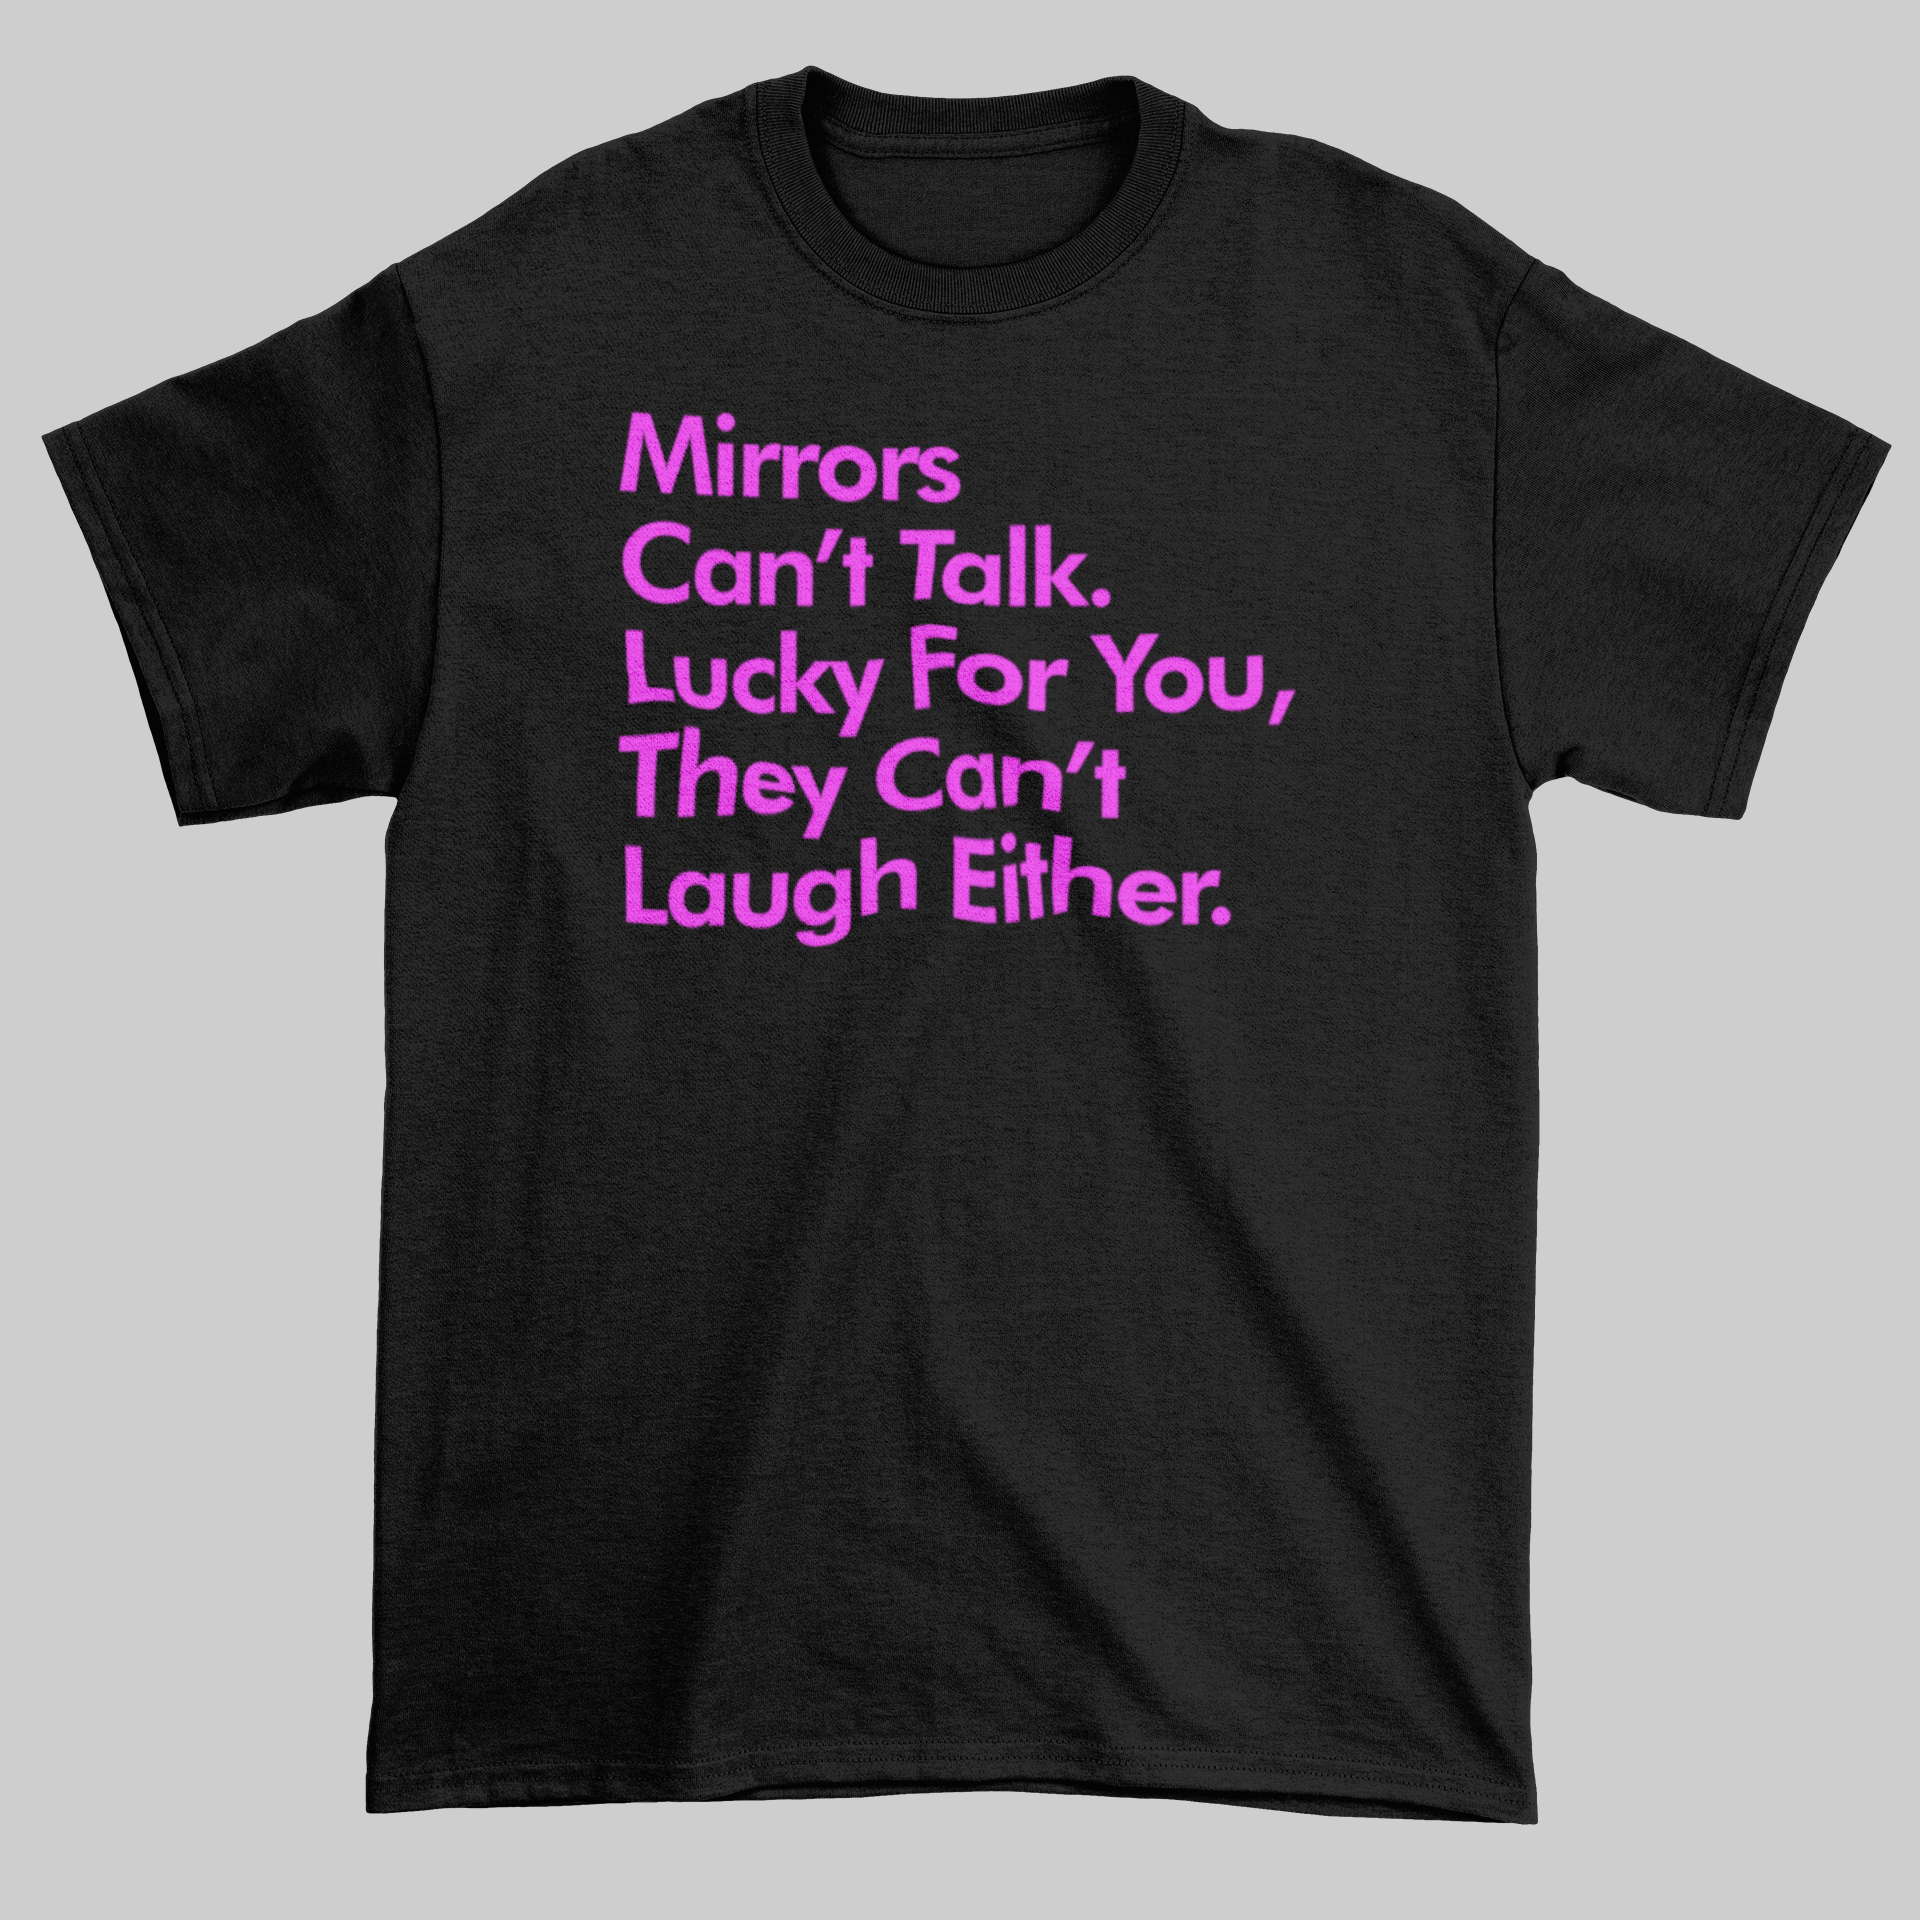 Mirrors Can't Talk. Lucky For You They Can't Laugh Either. - Jay's Custom Prints